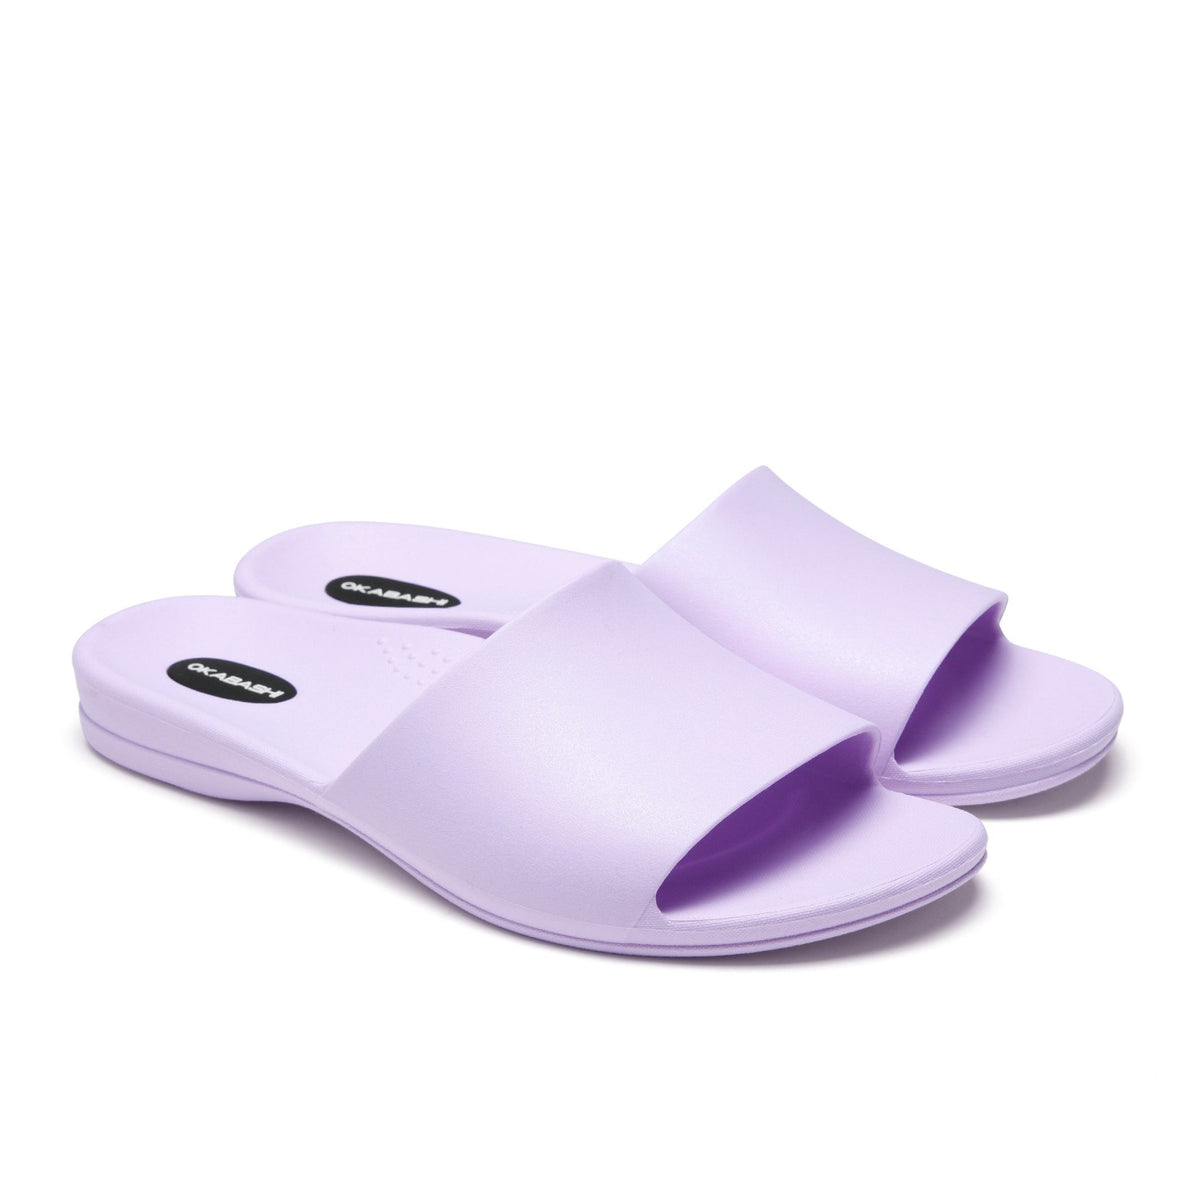 Cruise | Women's Slide Spa Sandals | Made in USA | Okabashi Shoes